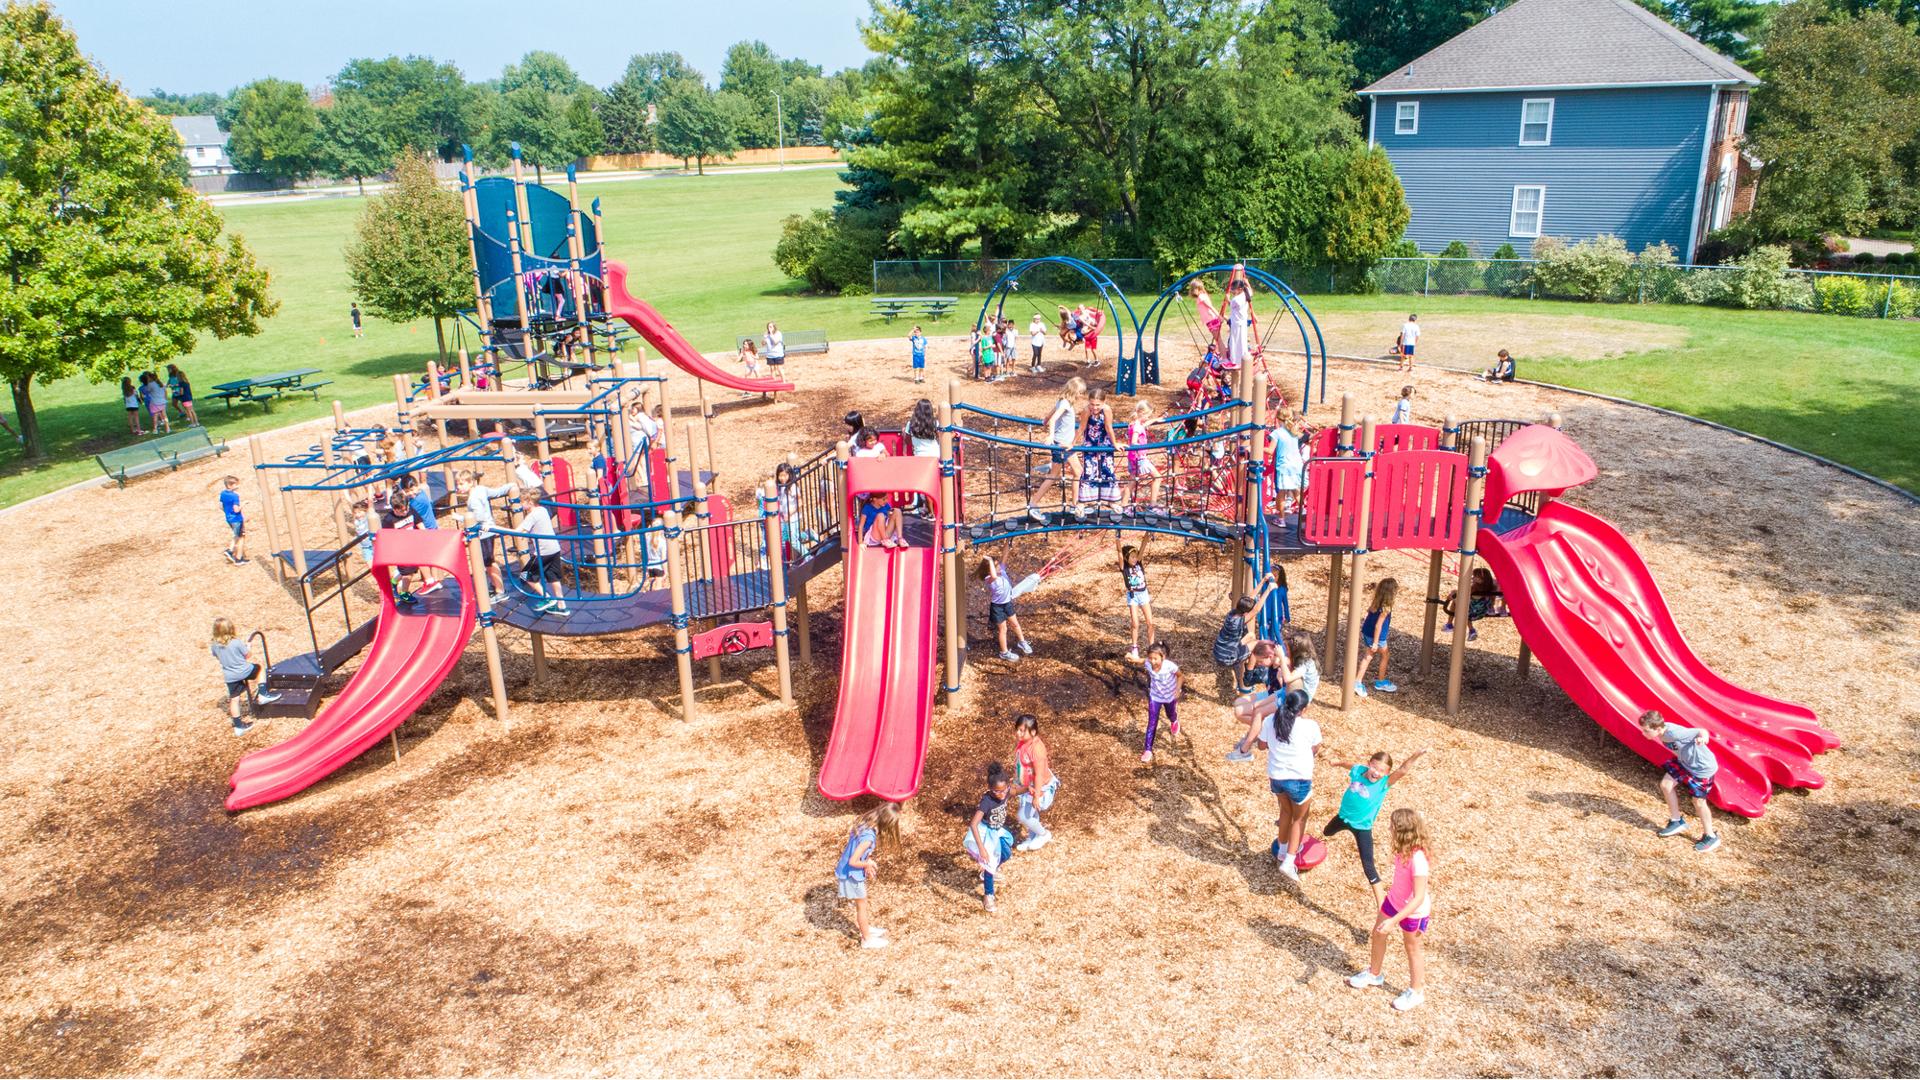 Scores of children from River Woods Elementary playing on their playground on a sunny day.